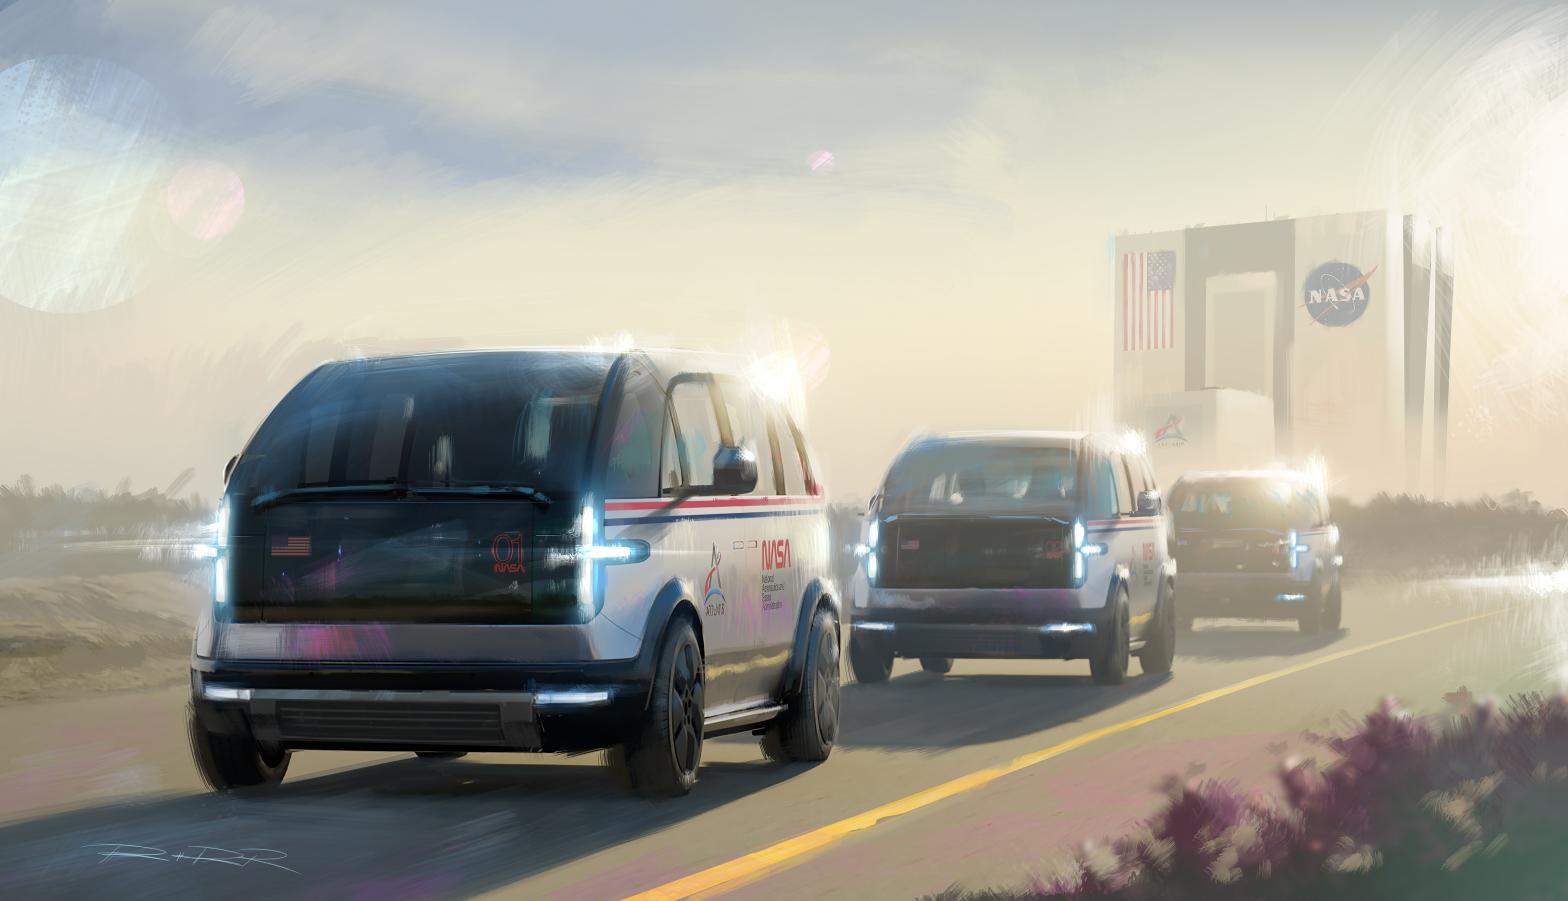 Conceptual image of the upcoming Crew Transportation Vehicles.  (Image: Canoo Technologies Inc.)